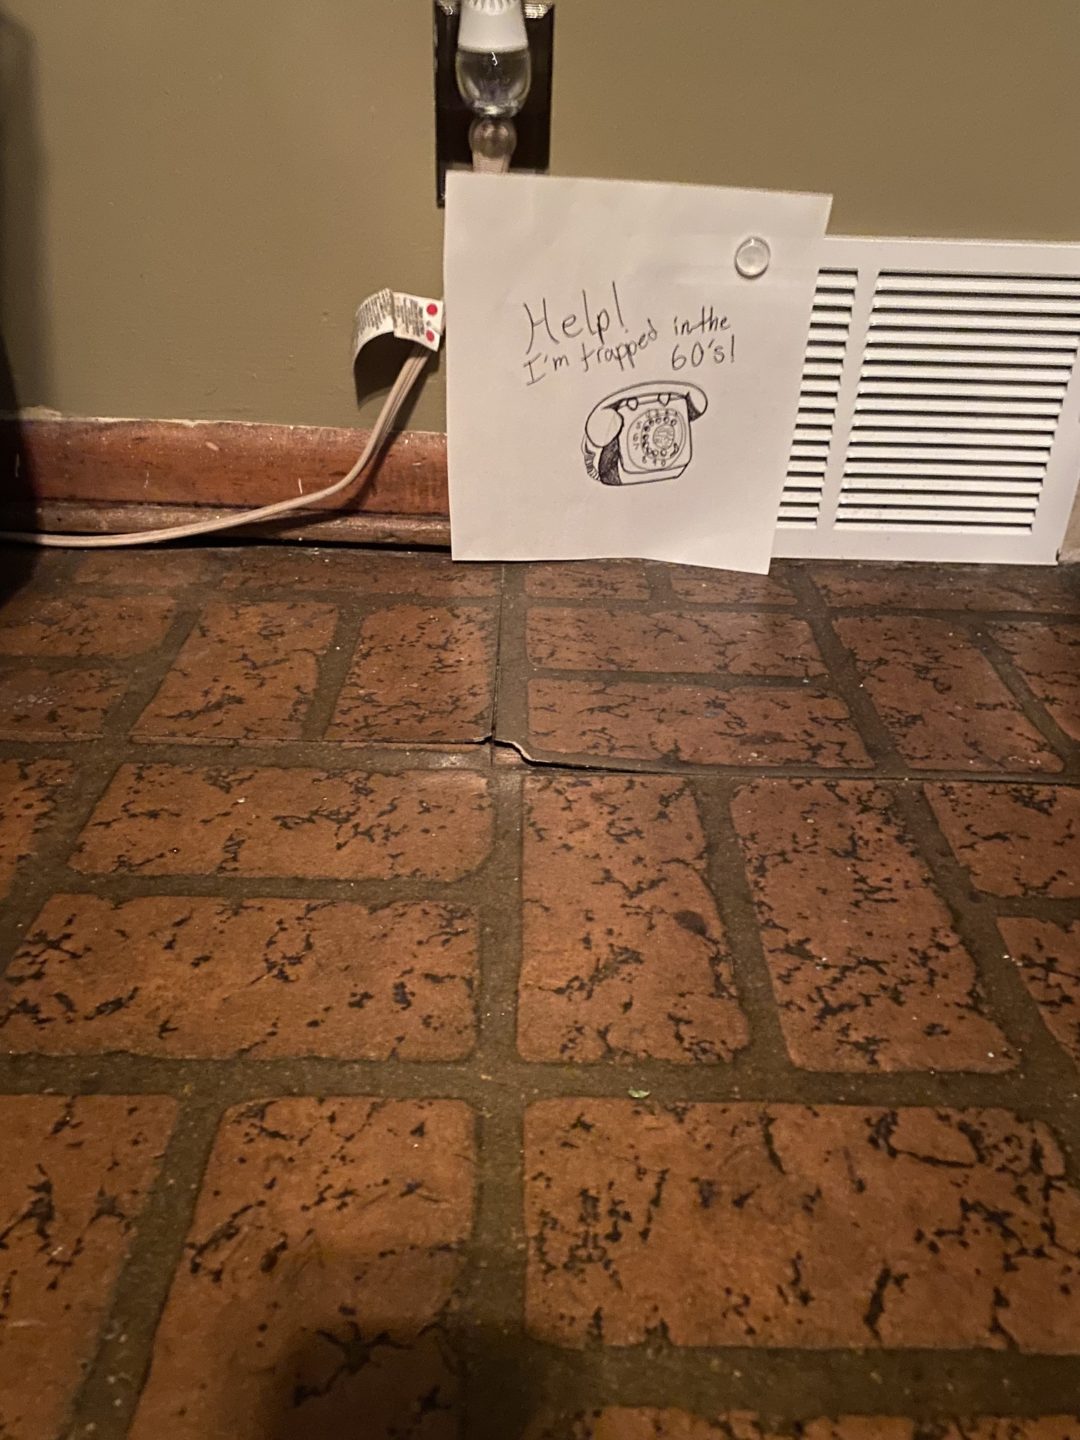 Help were trapped in the 60’s ugly floor contest entry photo